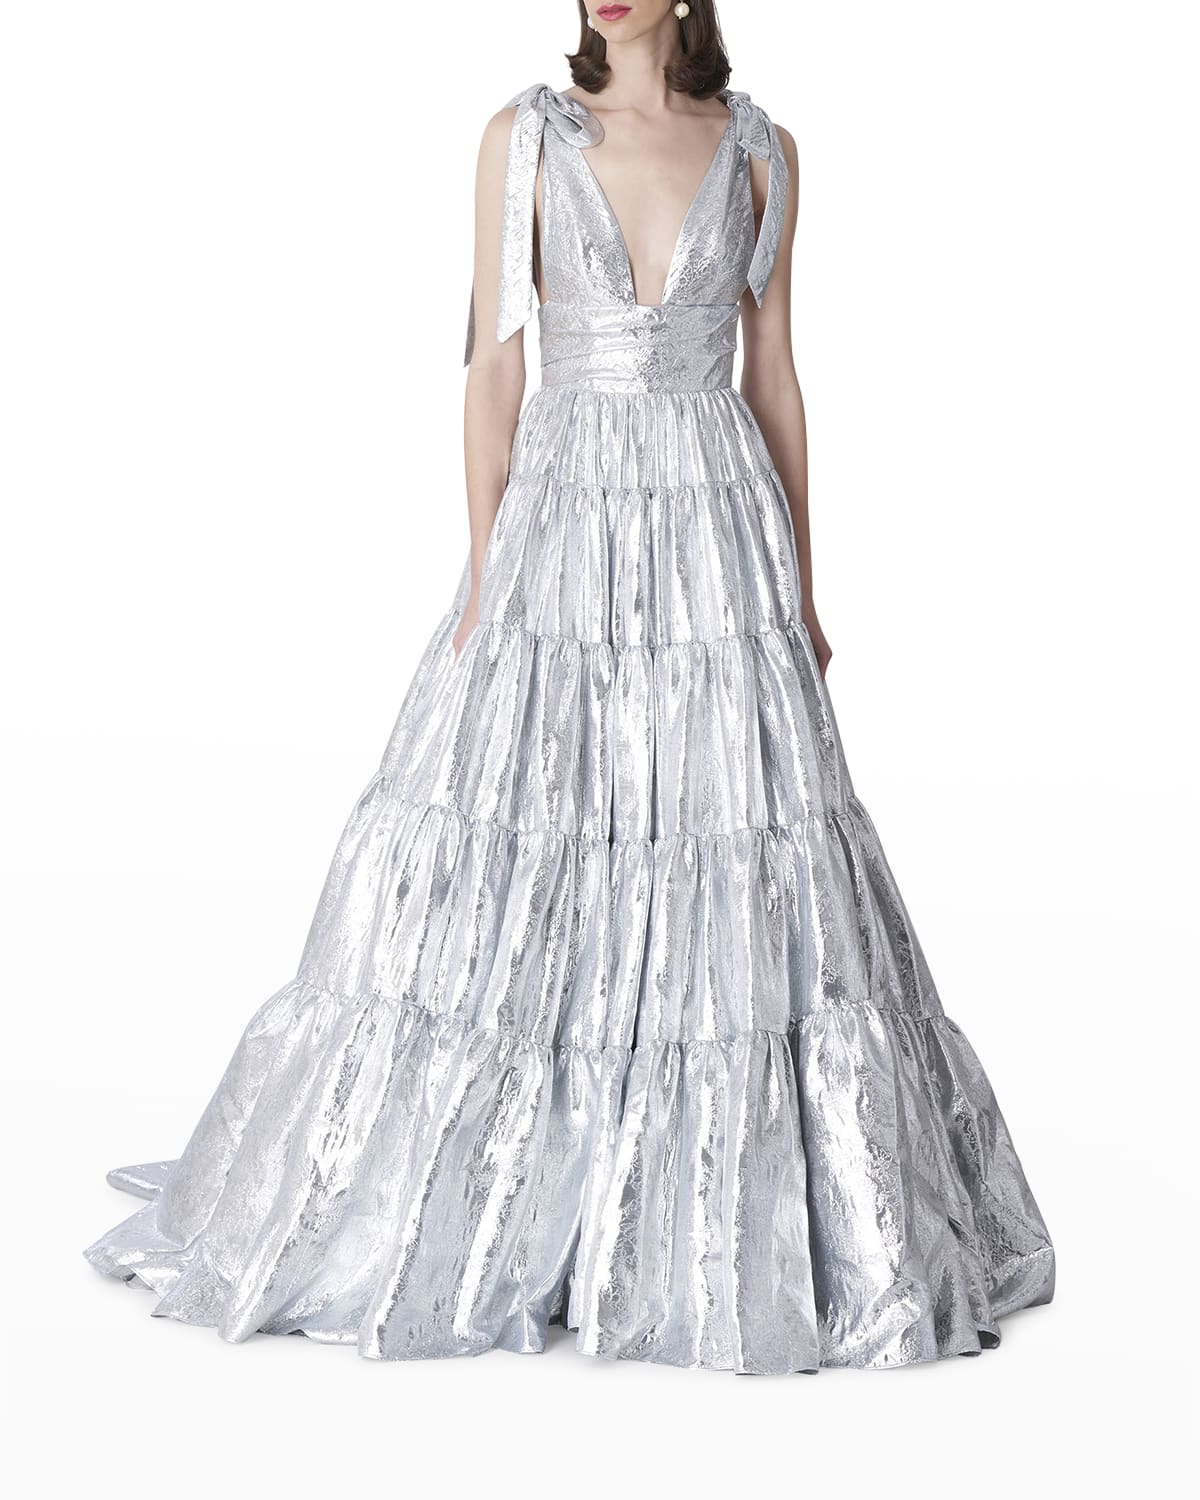 Bow-Strap Metallic Jacquard Tiered Gown